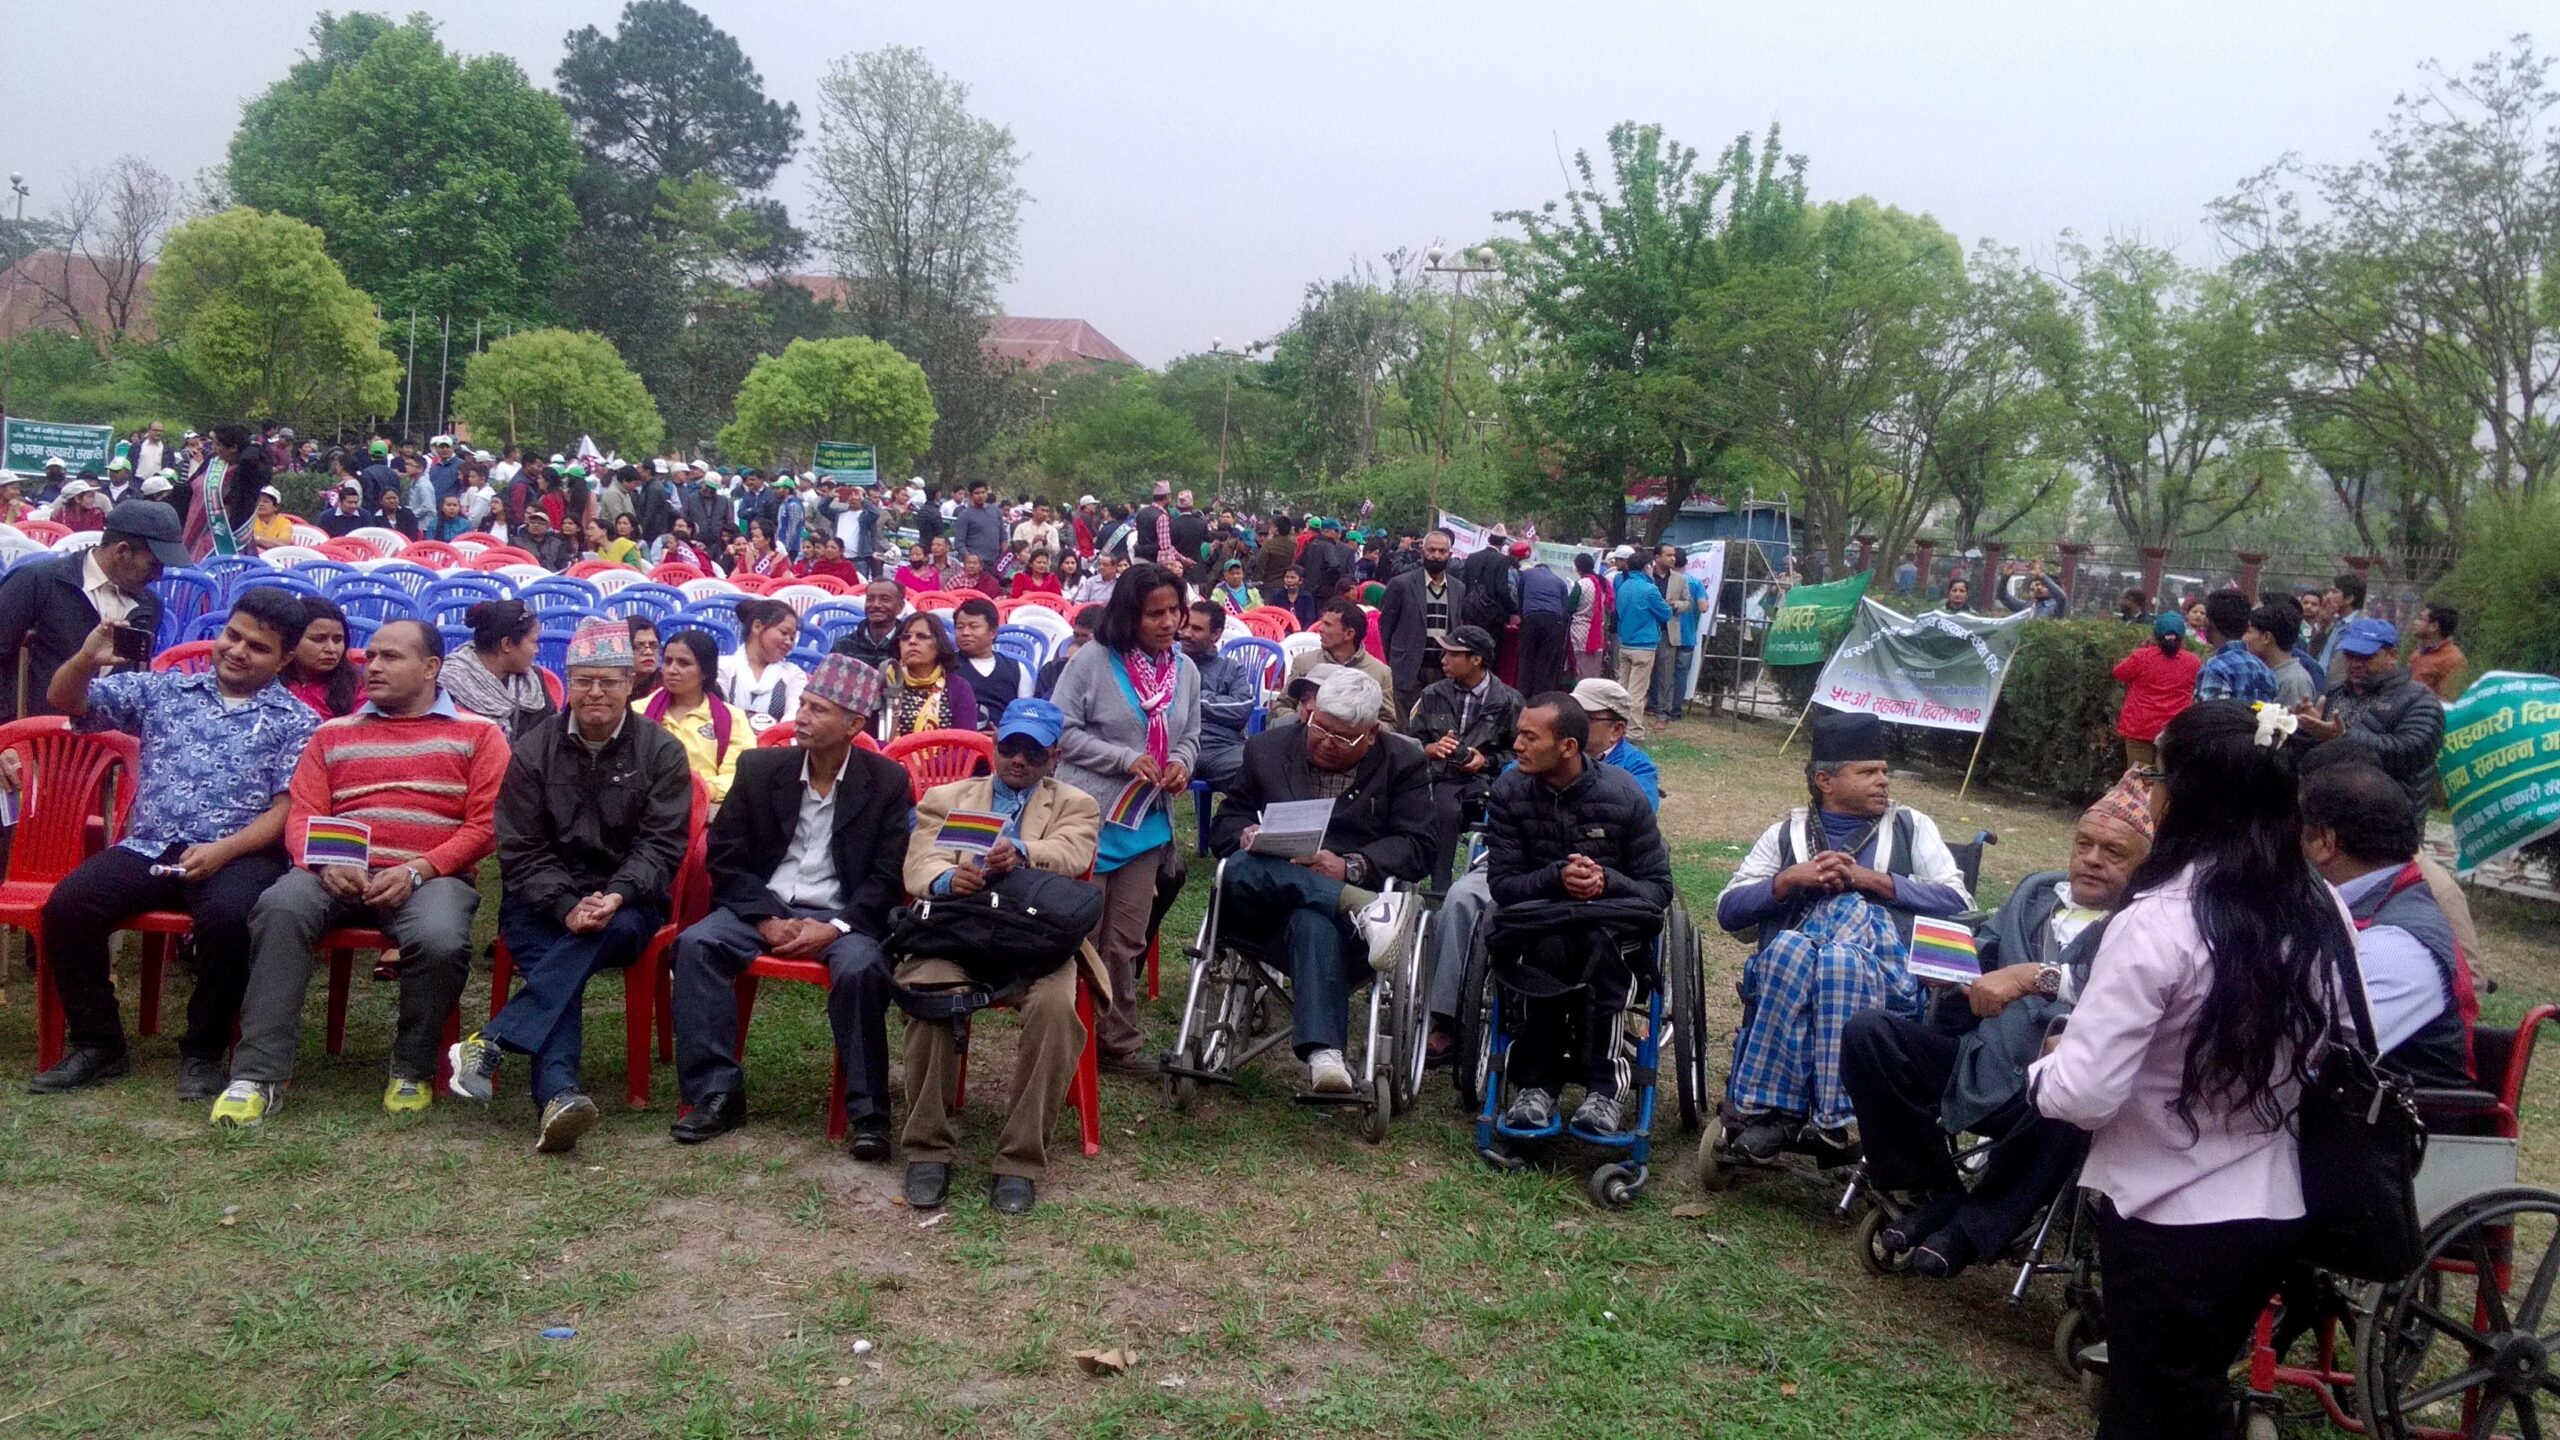 The project’s direct beneficiaries and their families participate in project events in Kathmandu, Nepal.